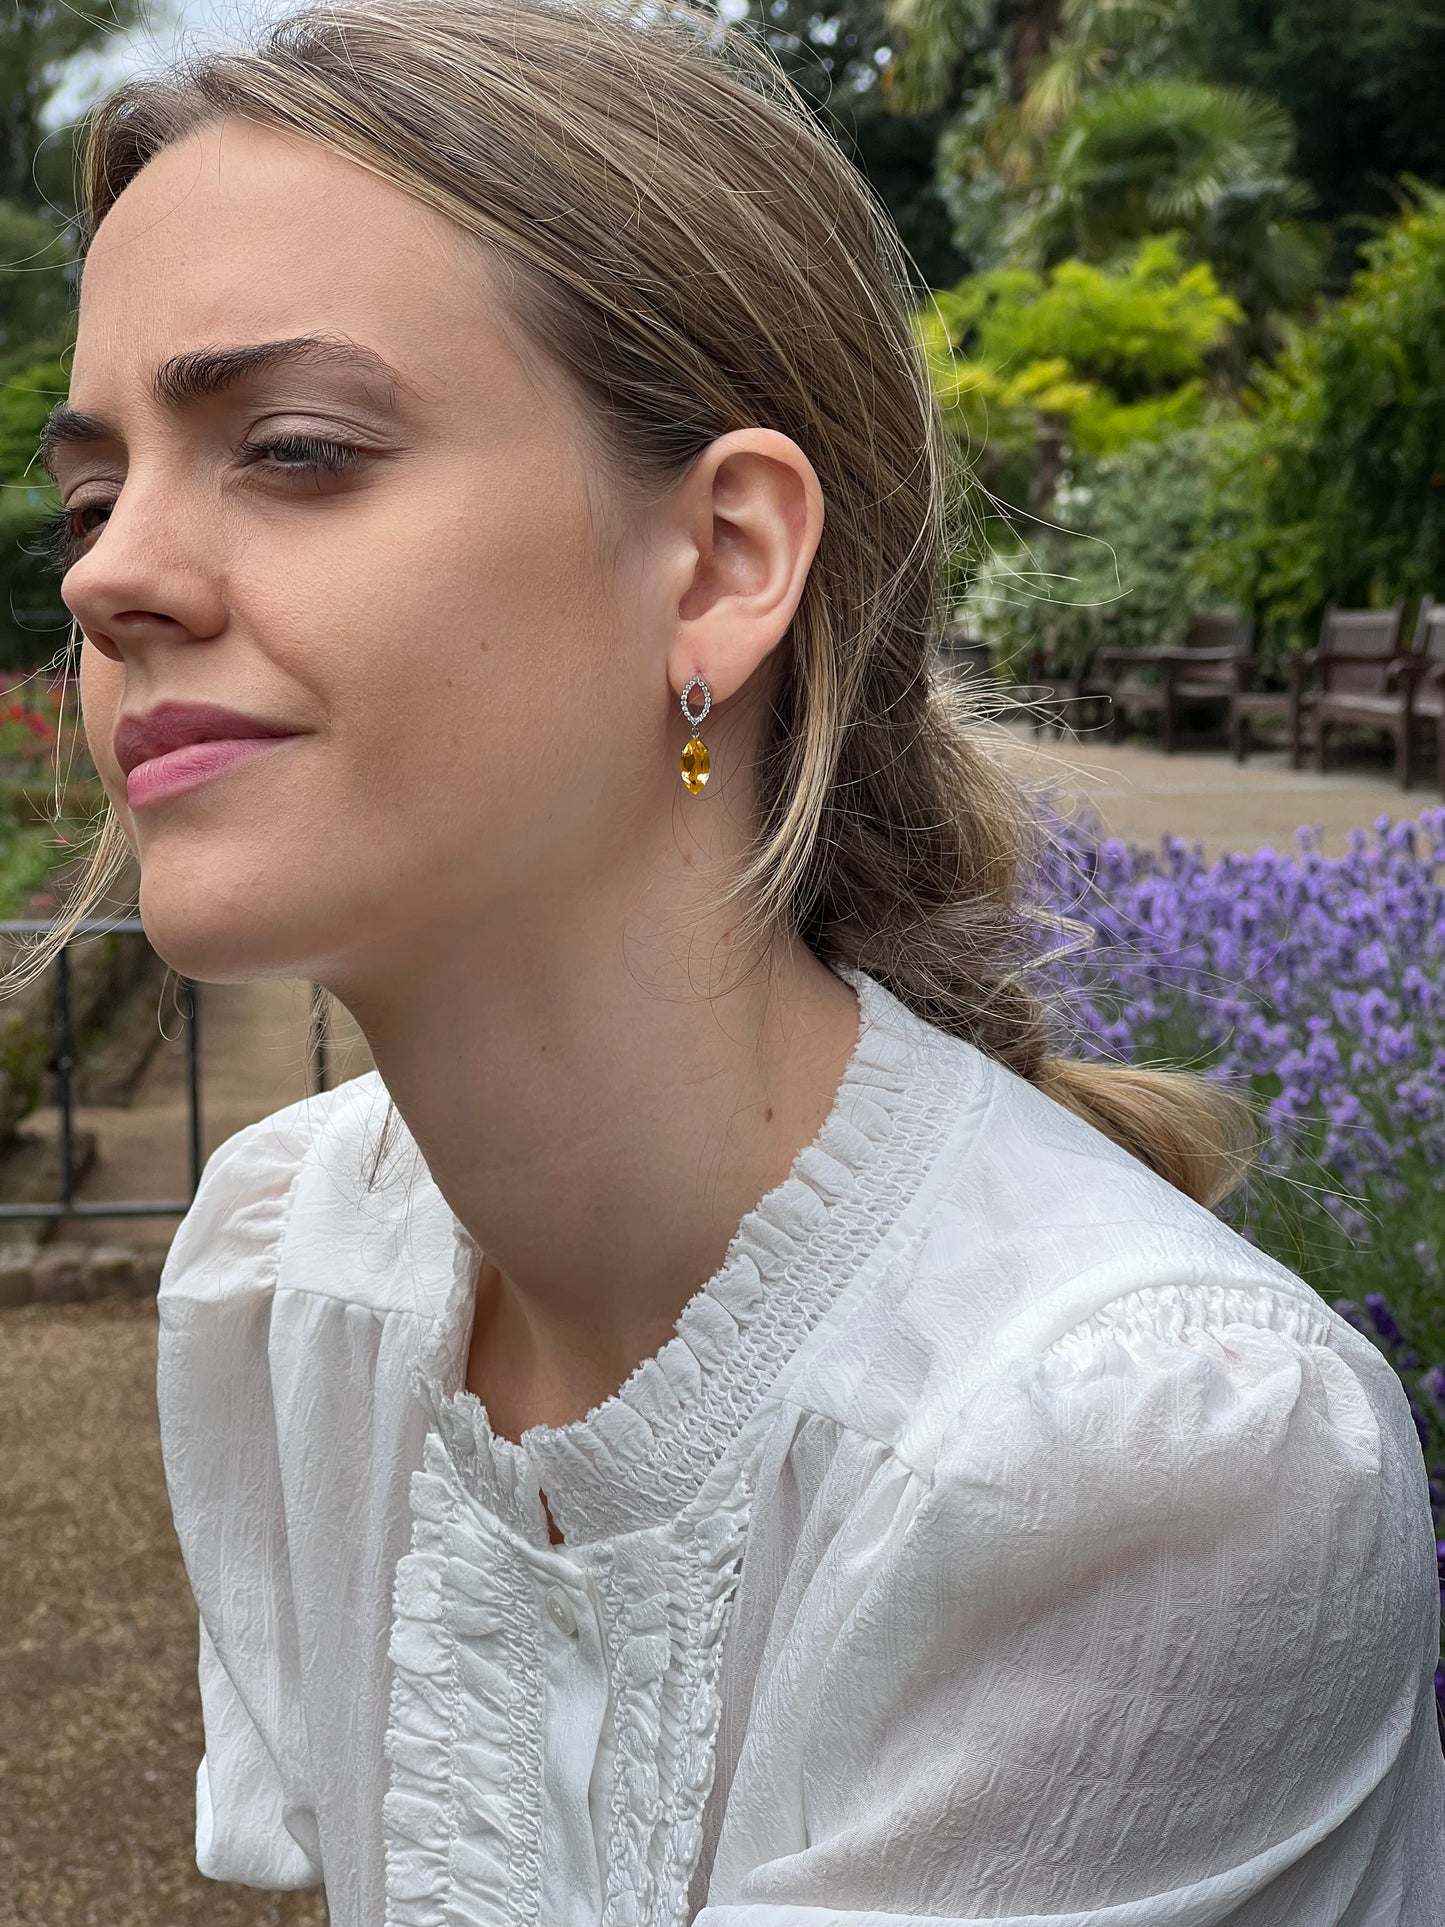 citrine and diamond drop earrings | Augustine Jewels | English Gardens Collection | Gemstone